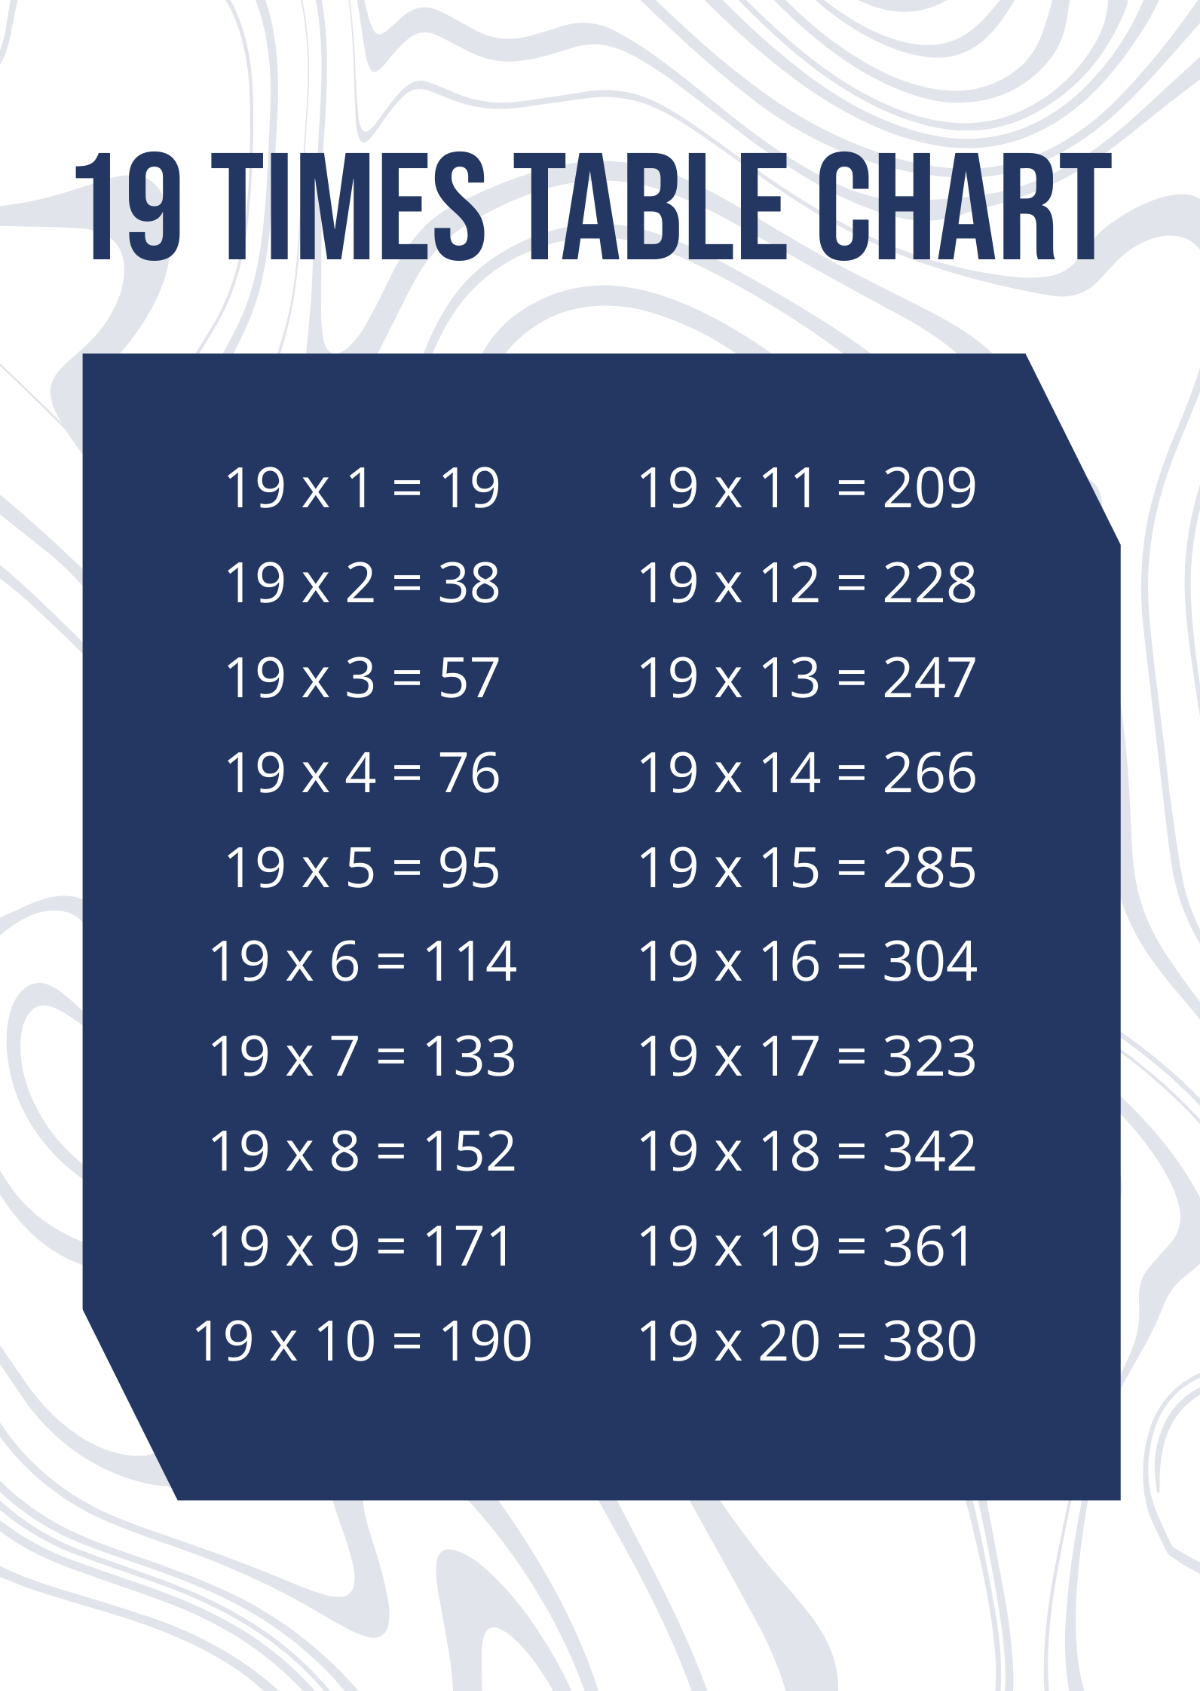 19 Times Table Chart Template